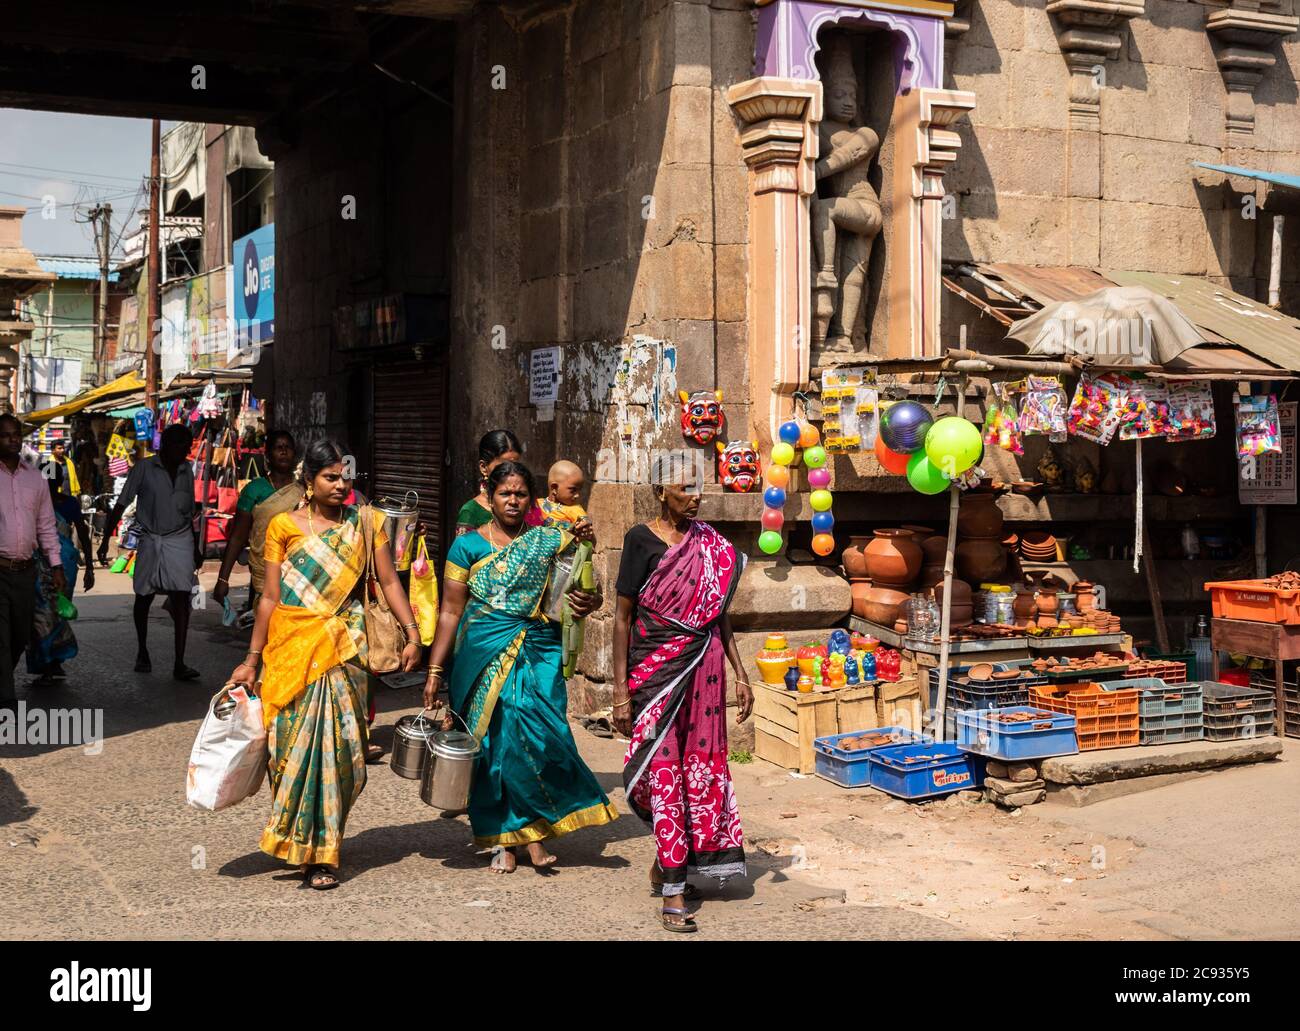 Trichy, Tamil Nadu, India - February 2020: Indian women in colorful saris walking in the market streets around the ancient Ranganathaswamy temple in S Stock Photo